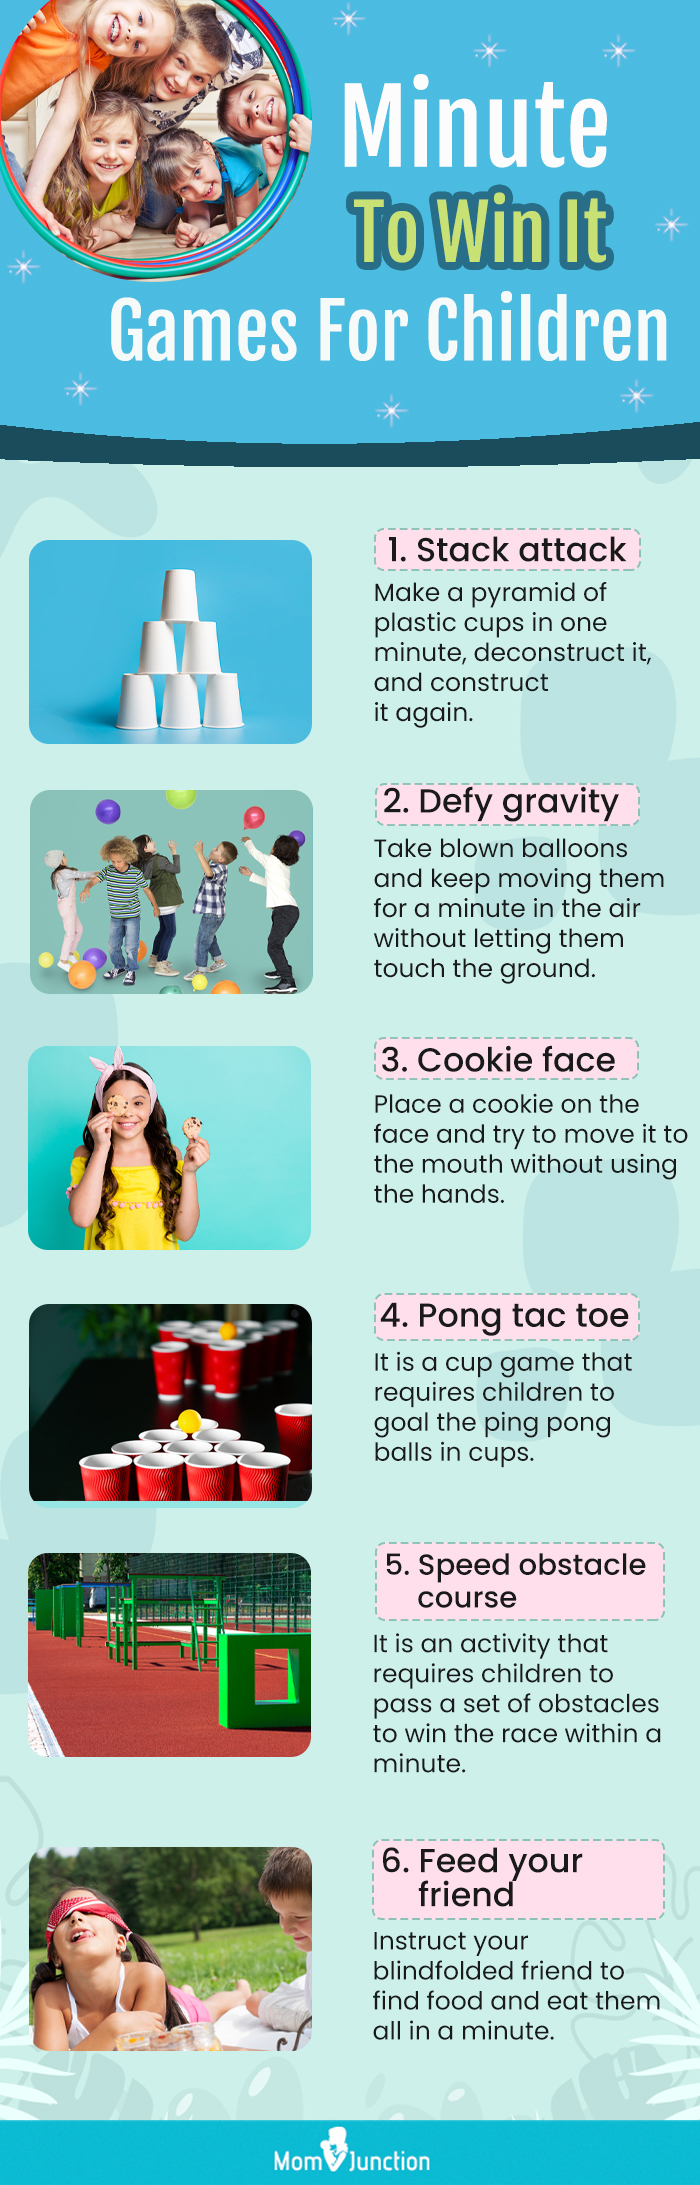 minute to win it games for children (infographic)